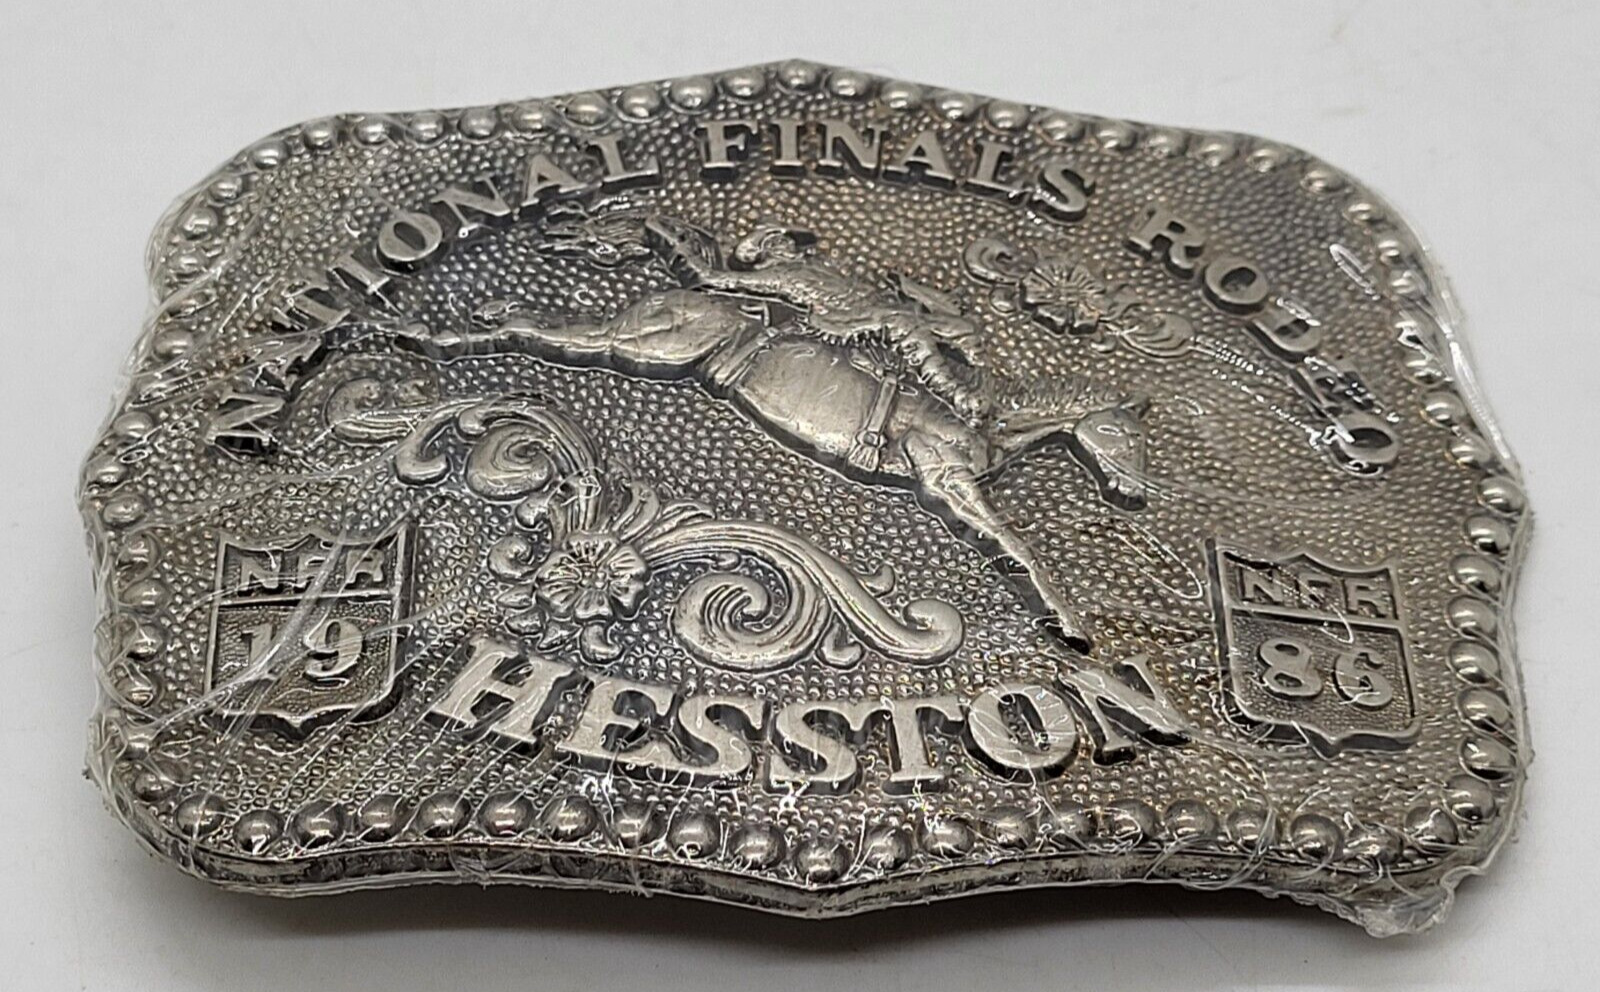 1986 Hesston National Finals Rodeo Belt Buckle, Limited Collector\'s Buckle, NEW